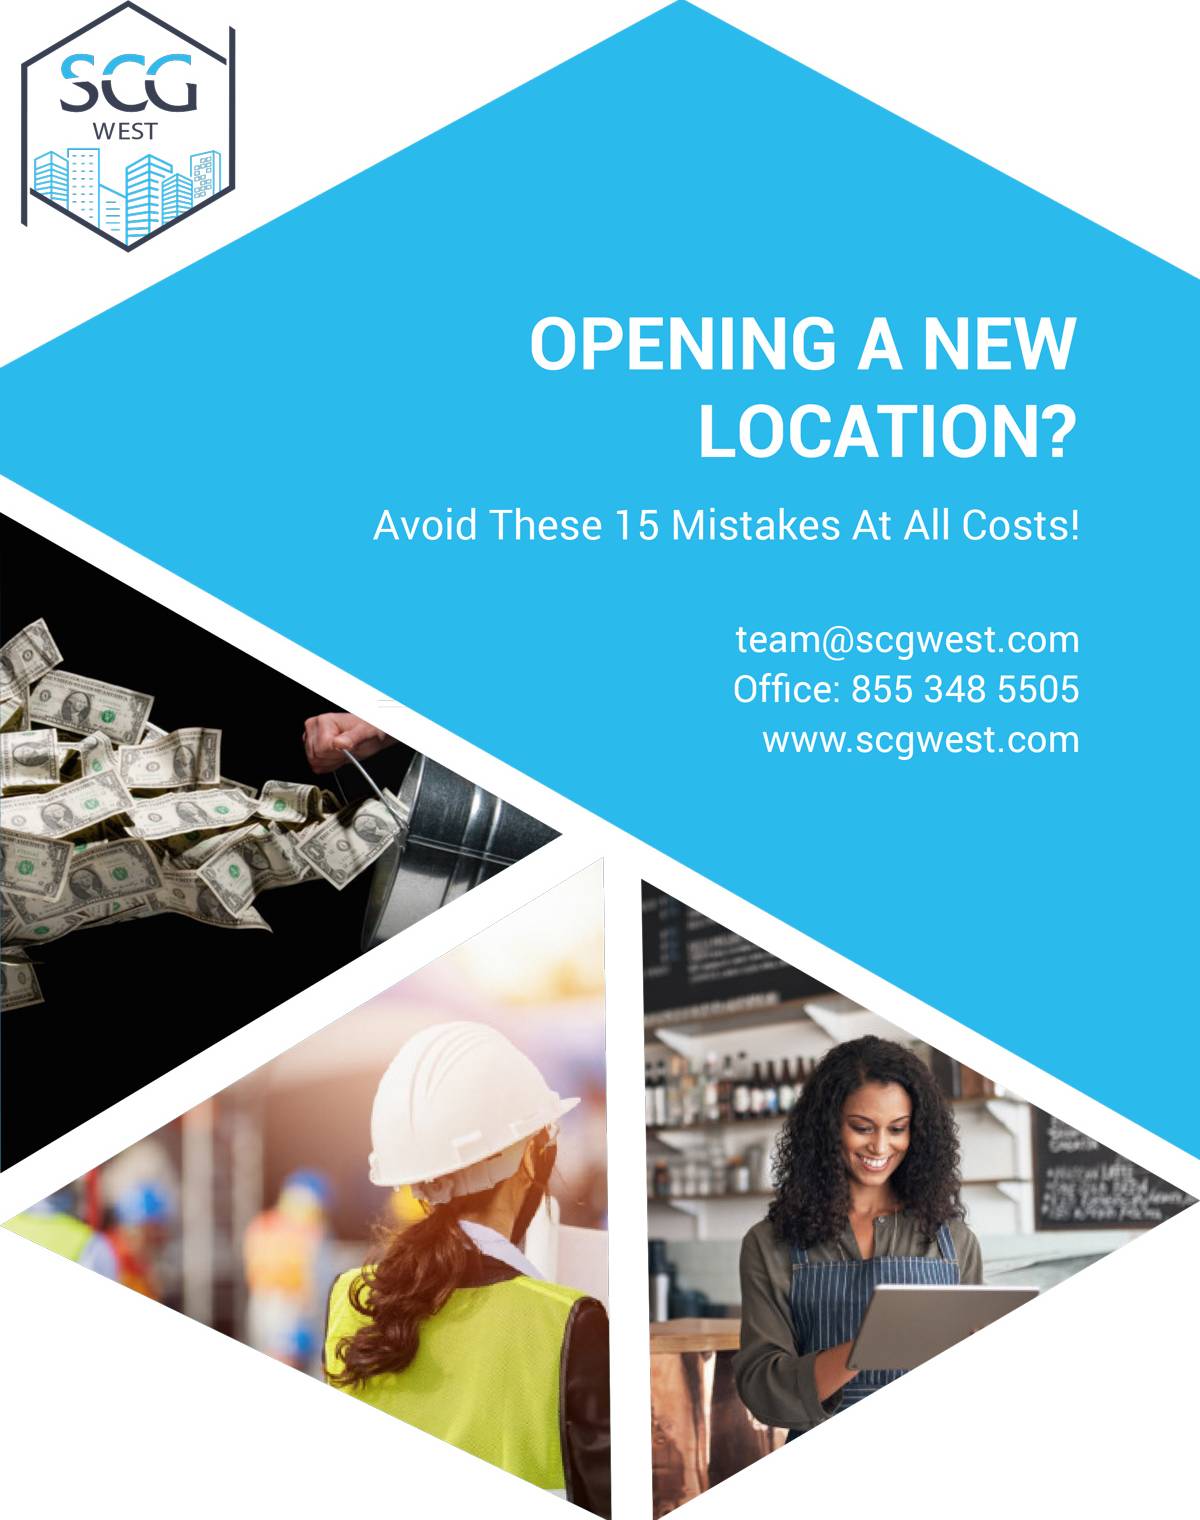 15-Mistakes-to-Avoid-When-Opening-a-New-Location-1